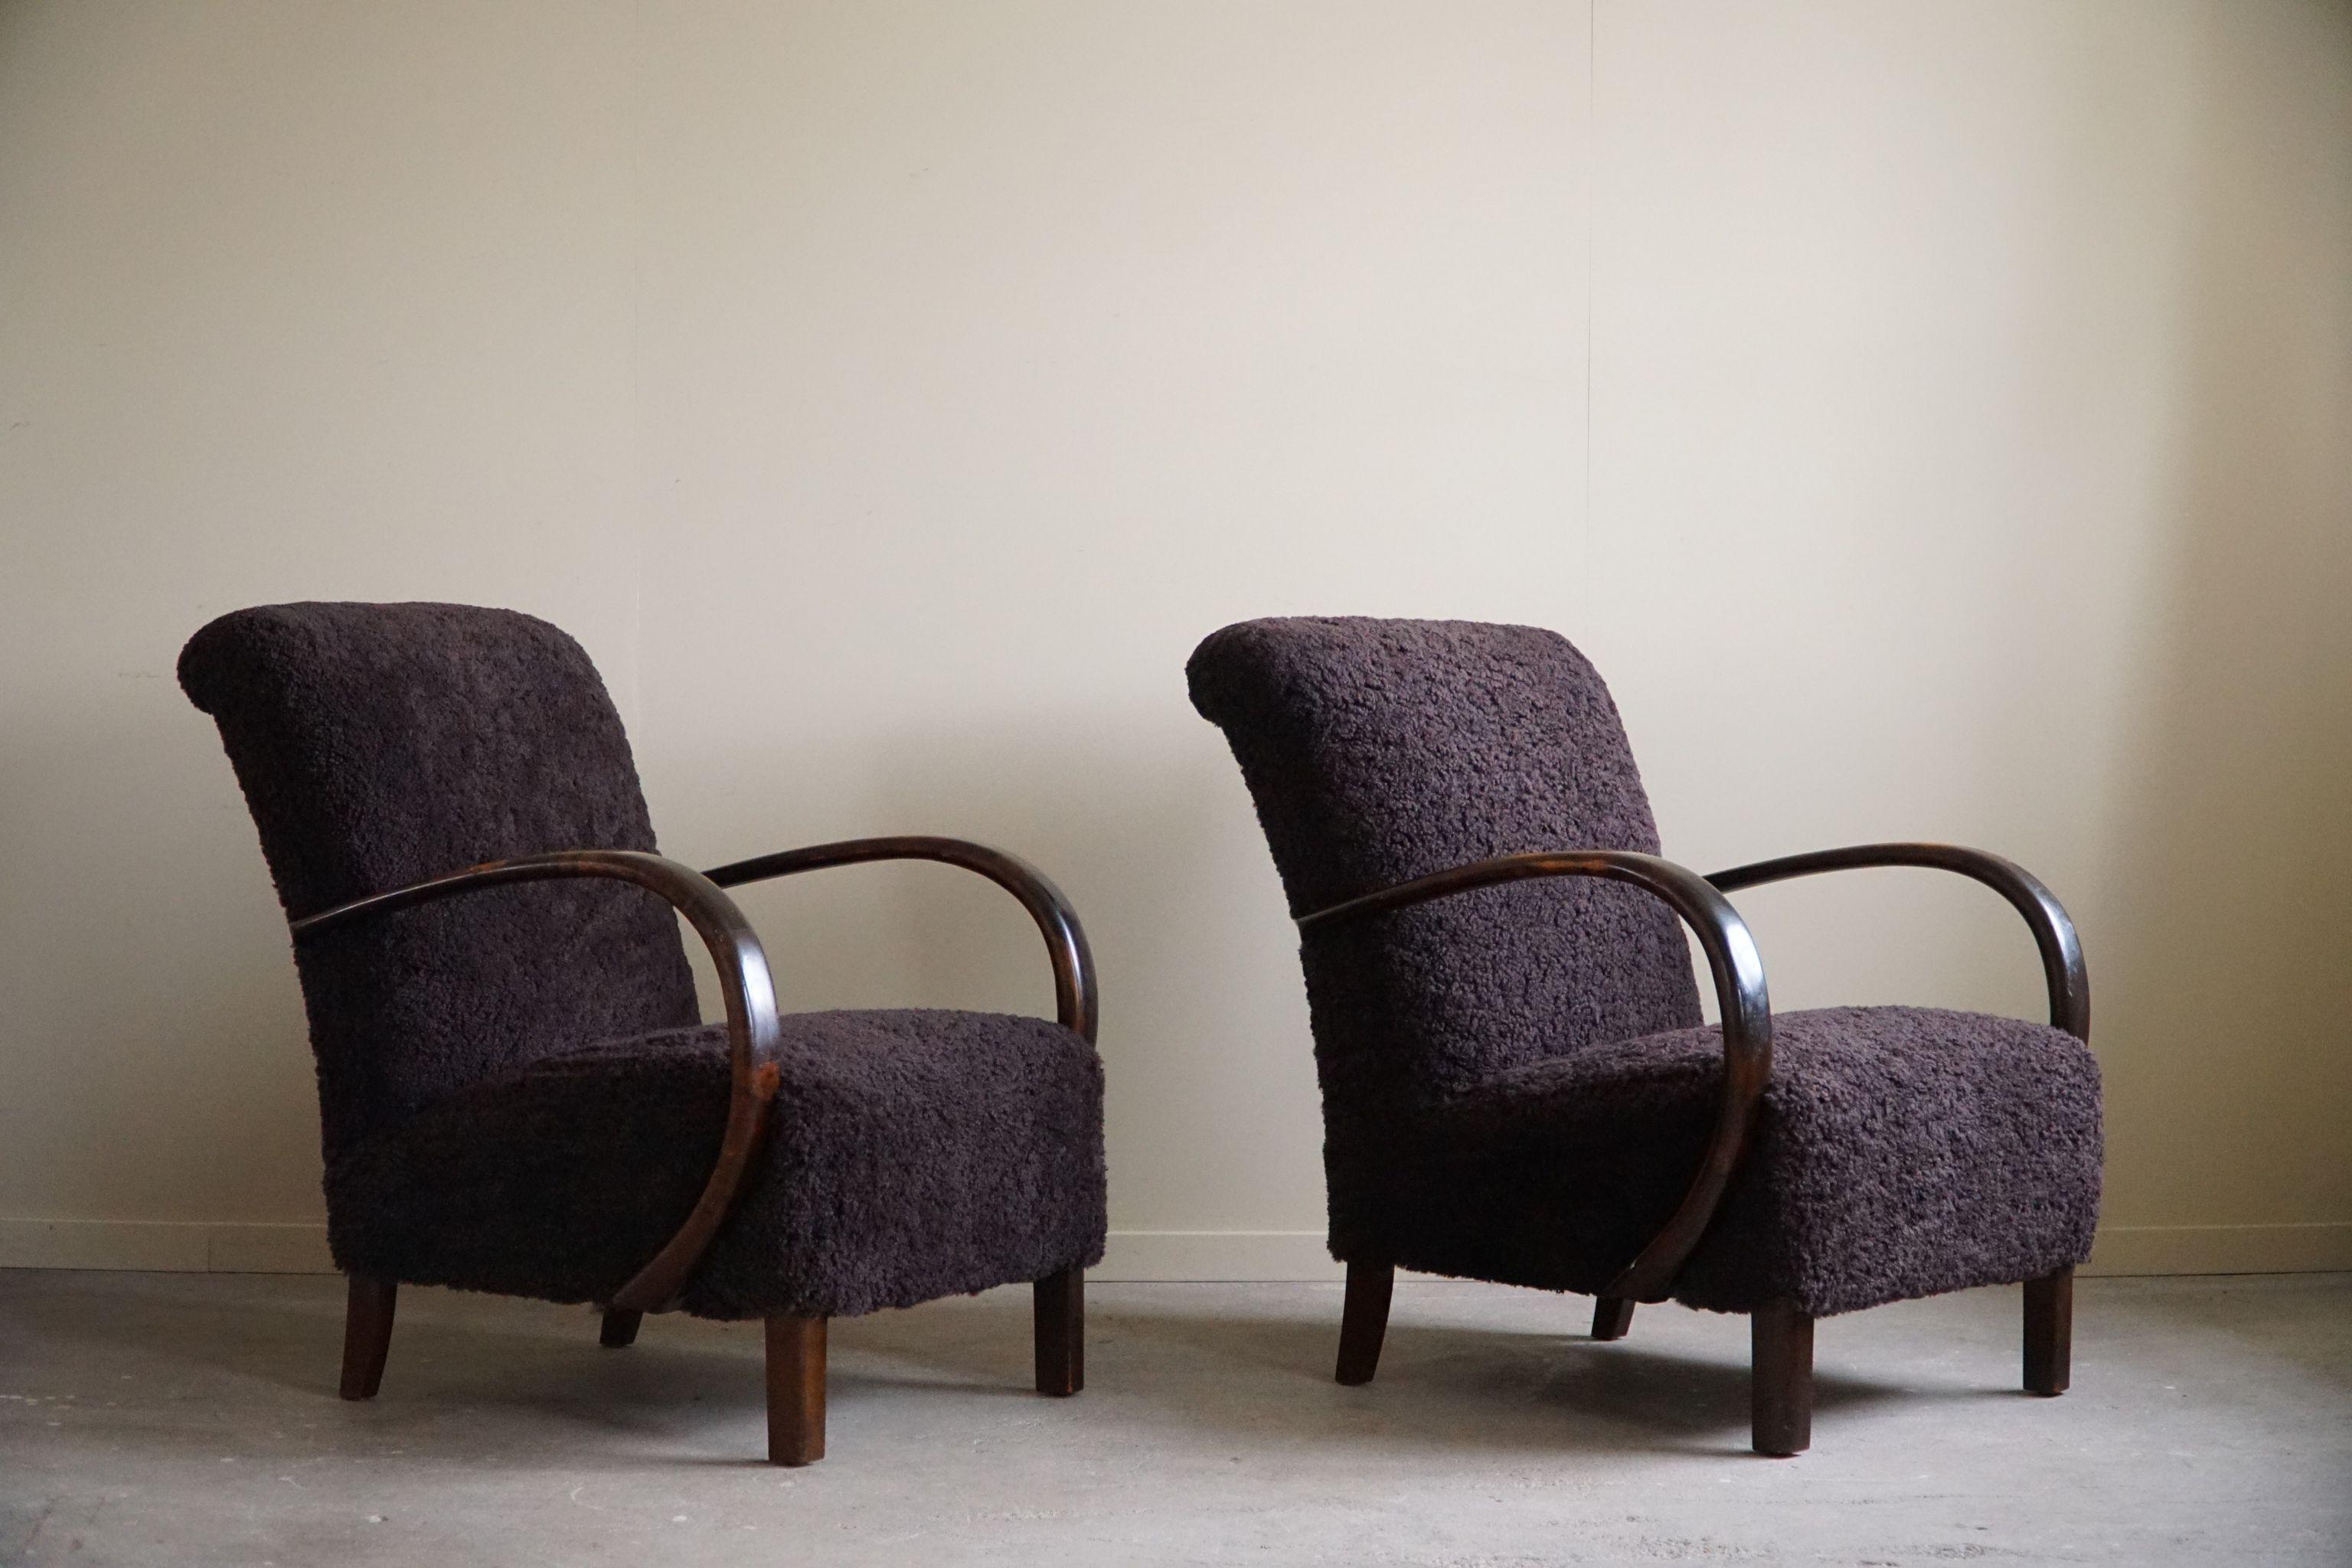 A Pair of Danish Mid Century Modern Lounge Chairs in Beech & Lambswool, 1940s For Sale 12